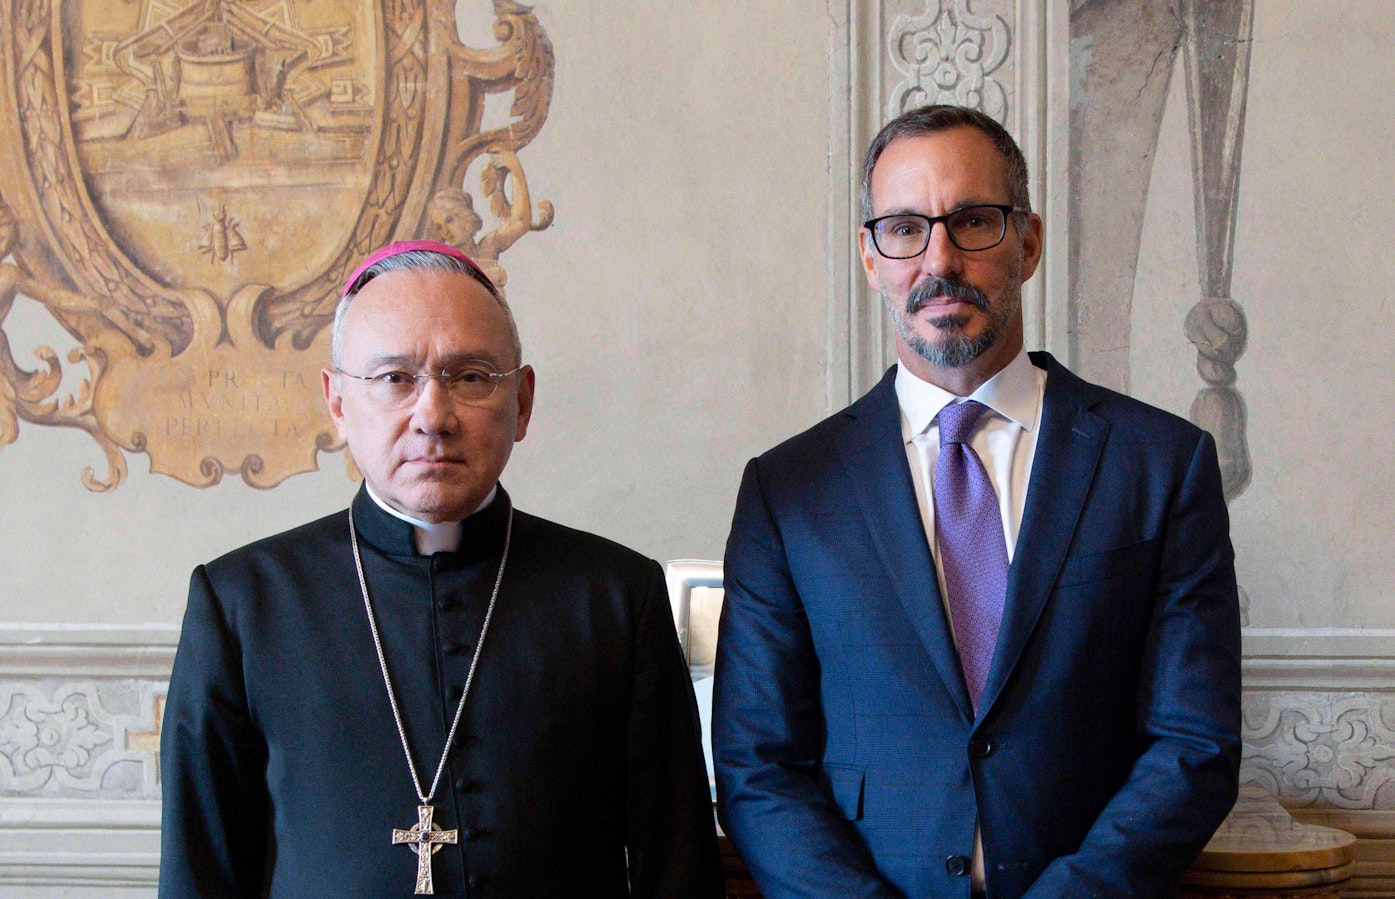 His Excellency Reverend Dom Edgar Peña Parra, the Substitute of the Secretariat of State at the Vatican, and Prince Rahim Aga Khan  | Divisione Produzione Fotografica / Vatican Media